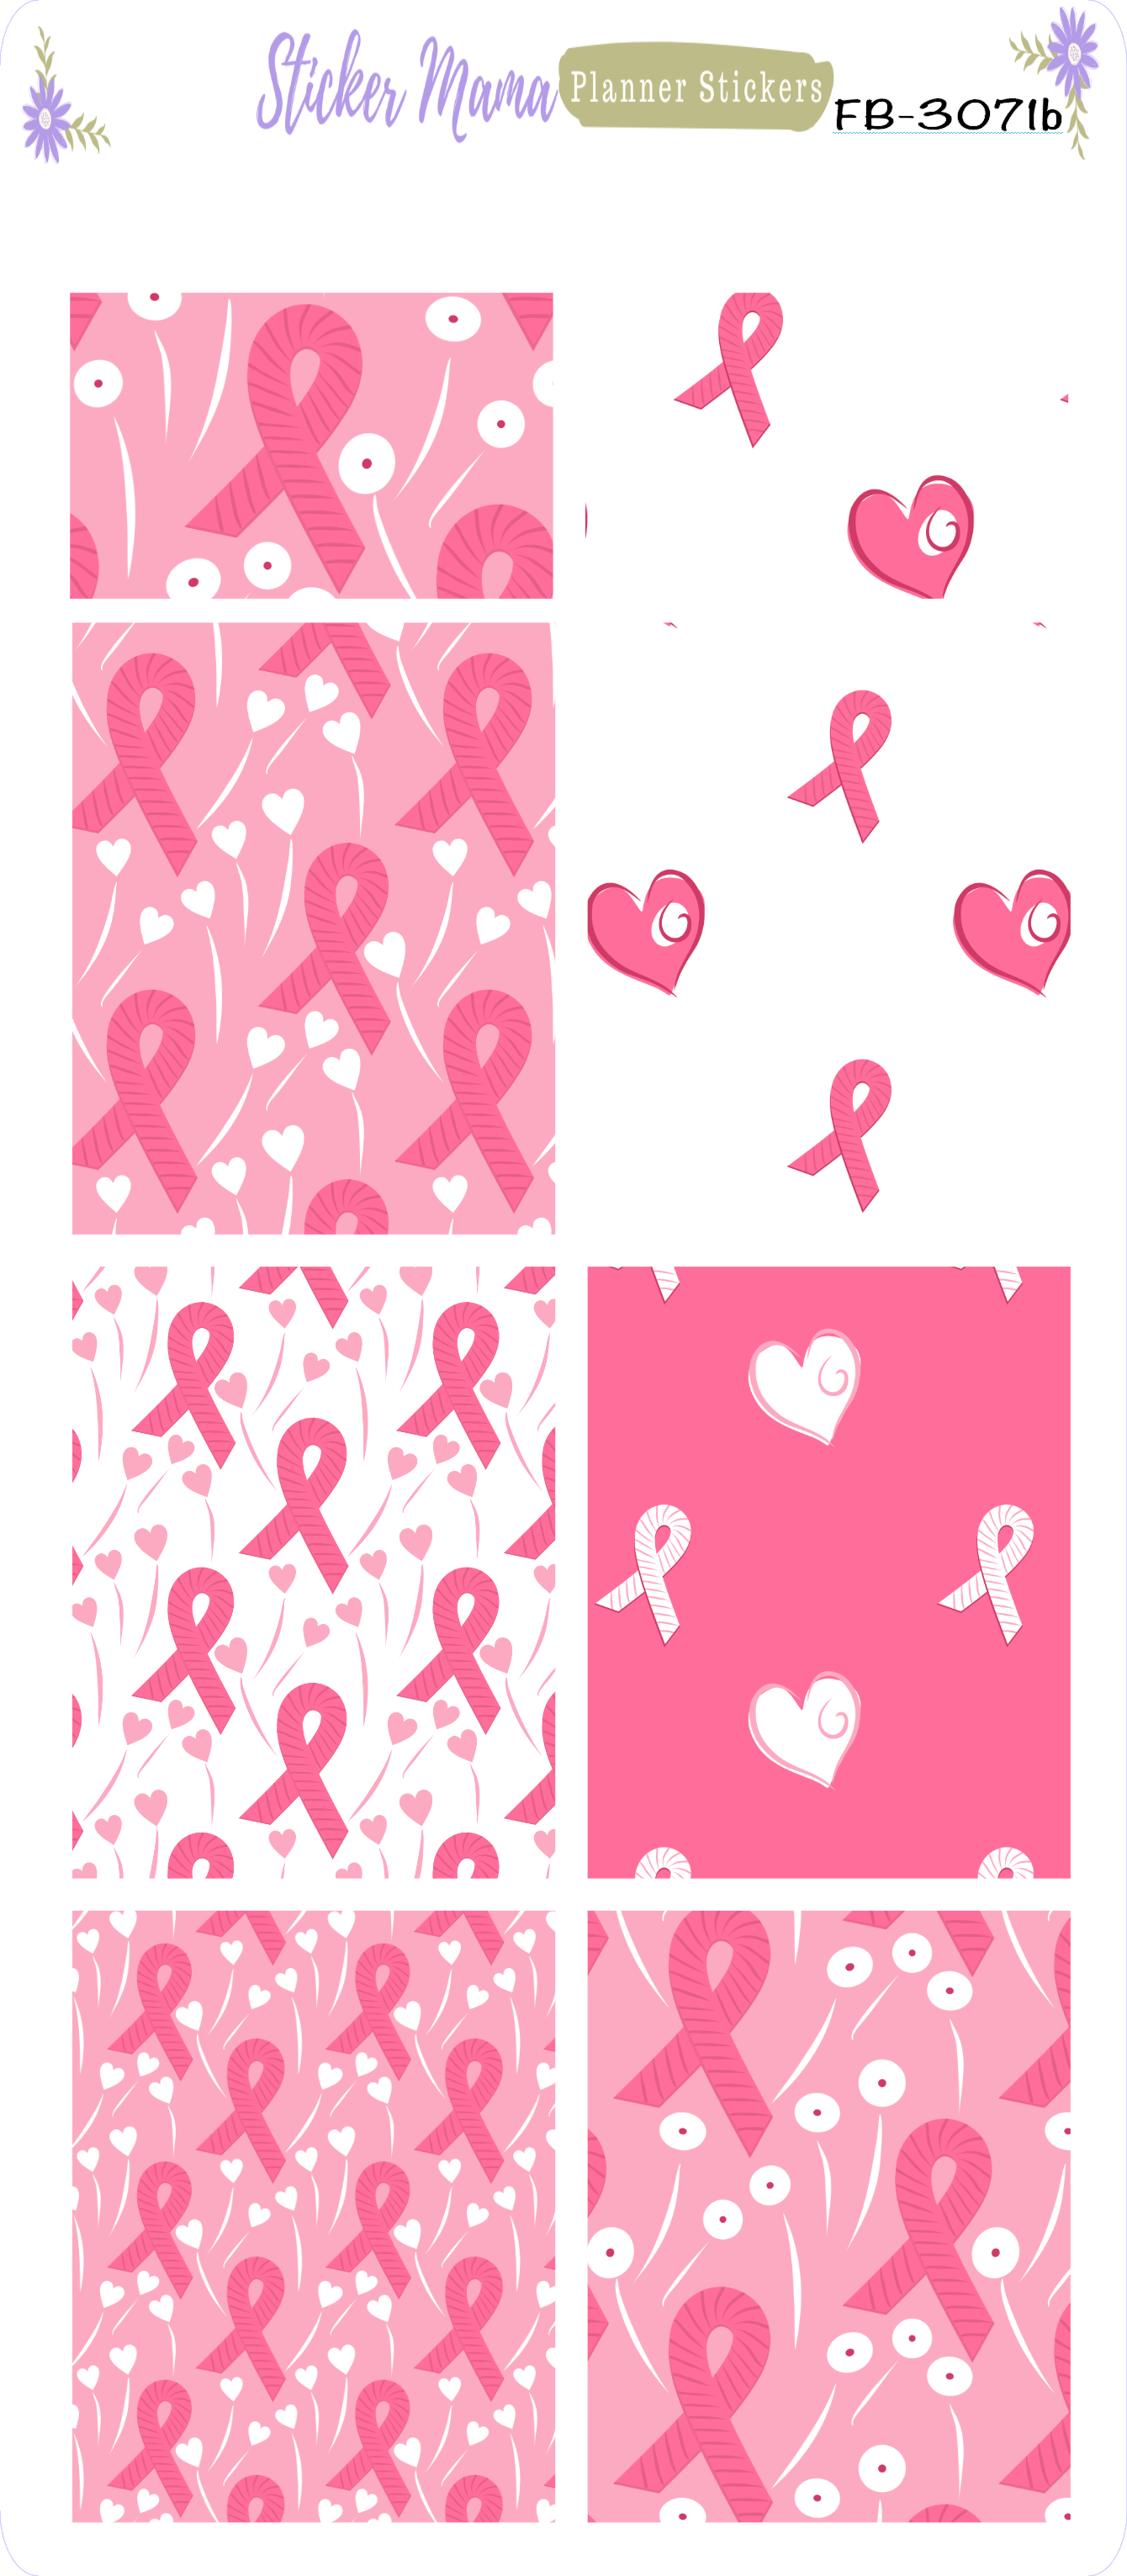 FB-3071 - October Breast Cancer Stickers - FULL BOX Stickers  - Planner Stickers - Full Box for Planners